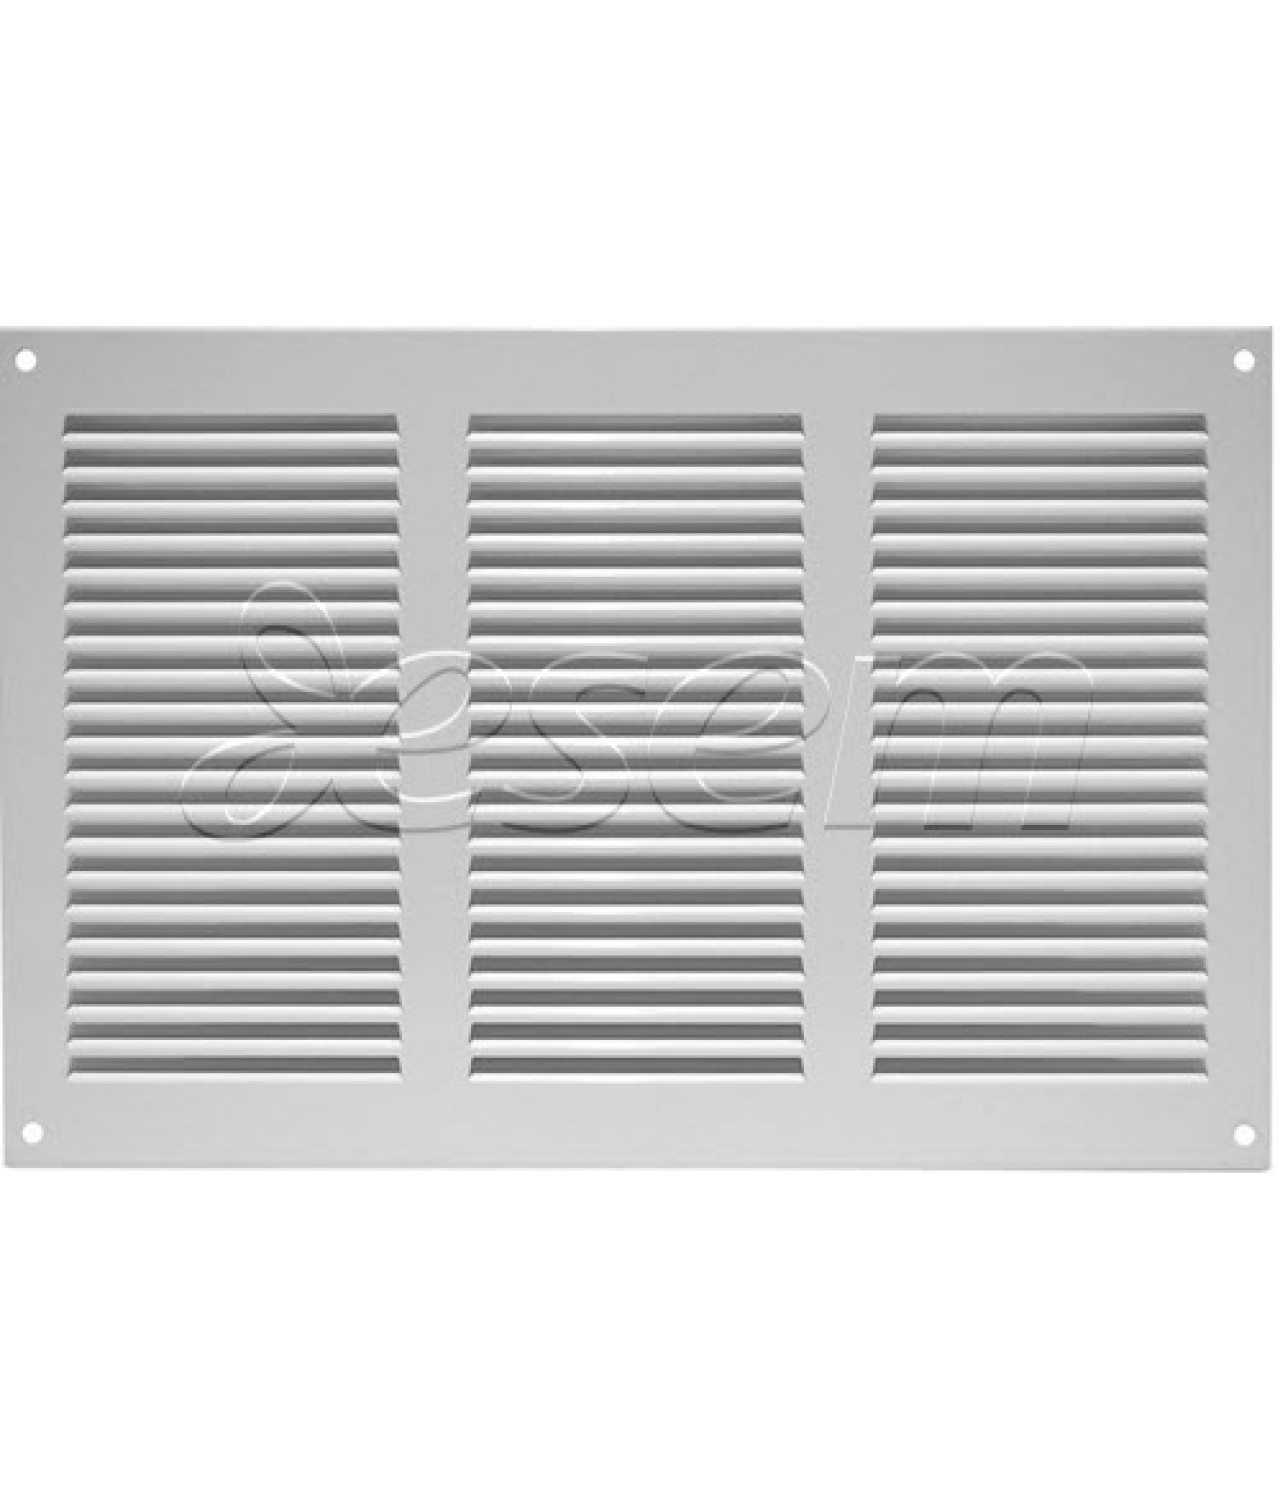 Metal vent cover EMS3020W 300x200 mm